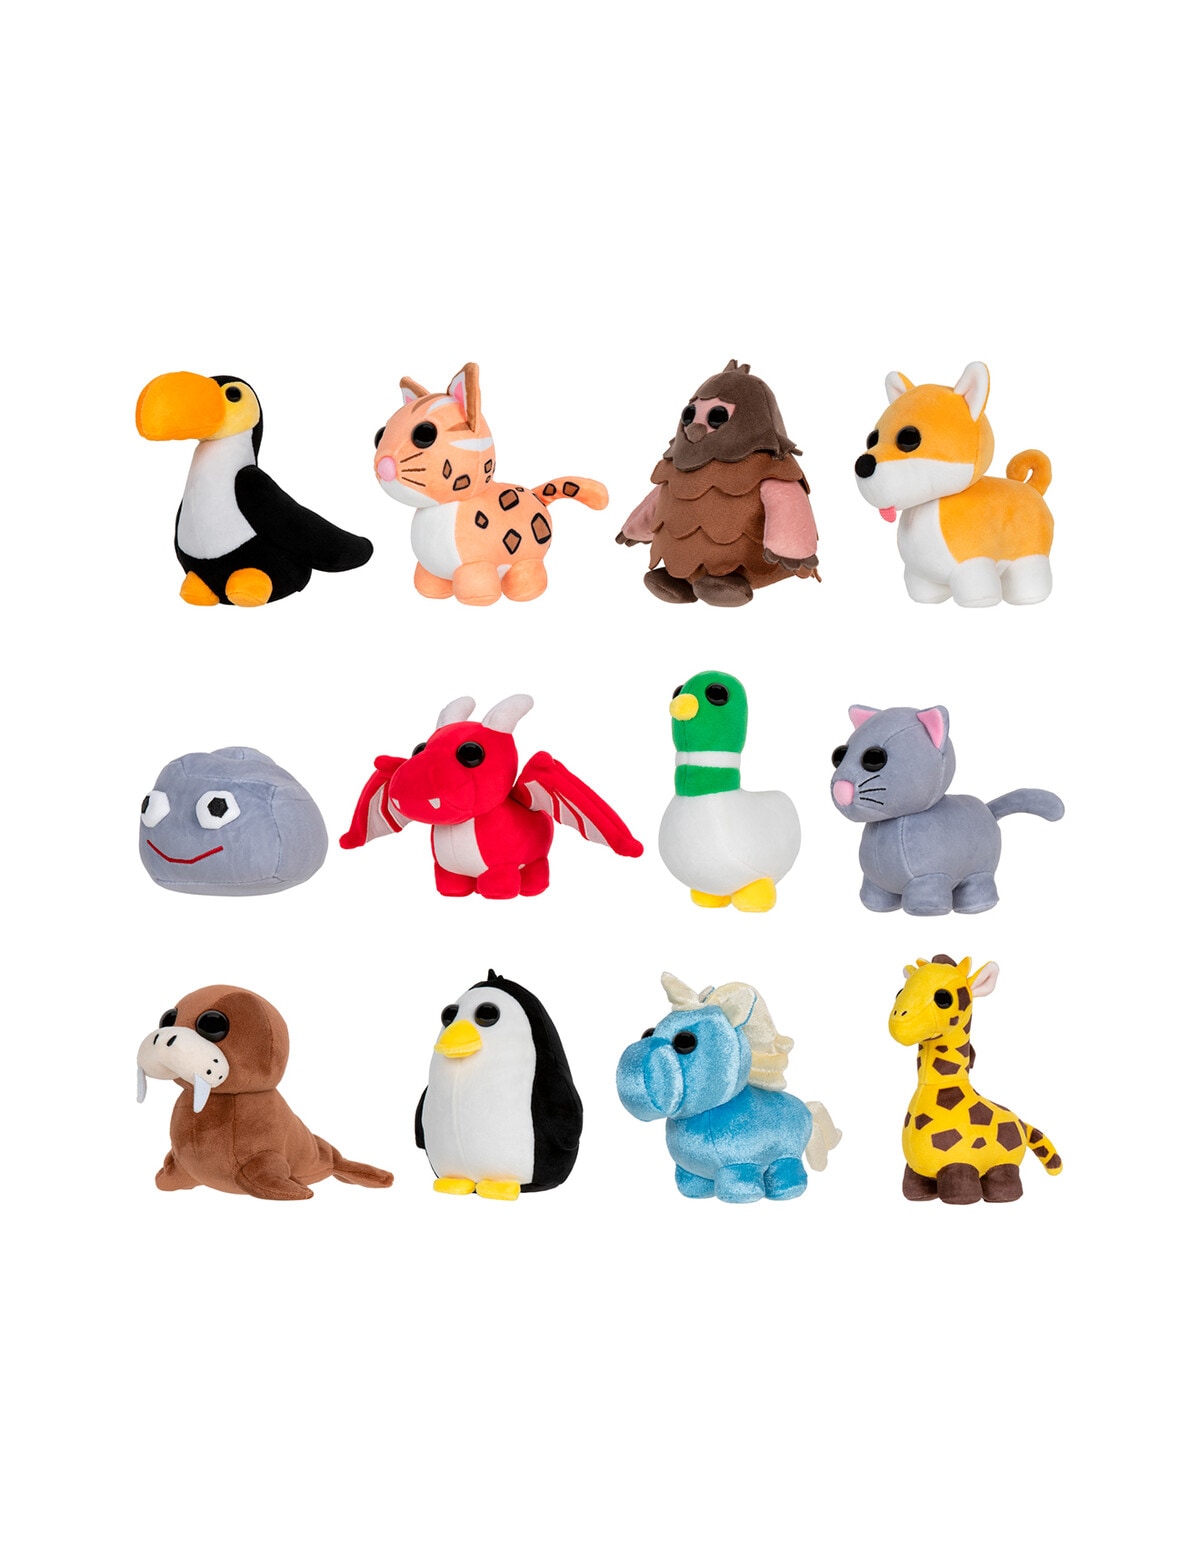 Adopt Me Little Soft Toy Surprise Plush Pets - Assorted